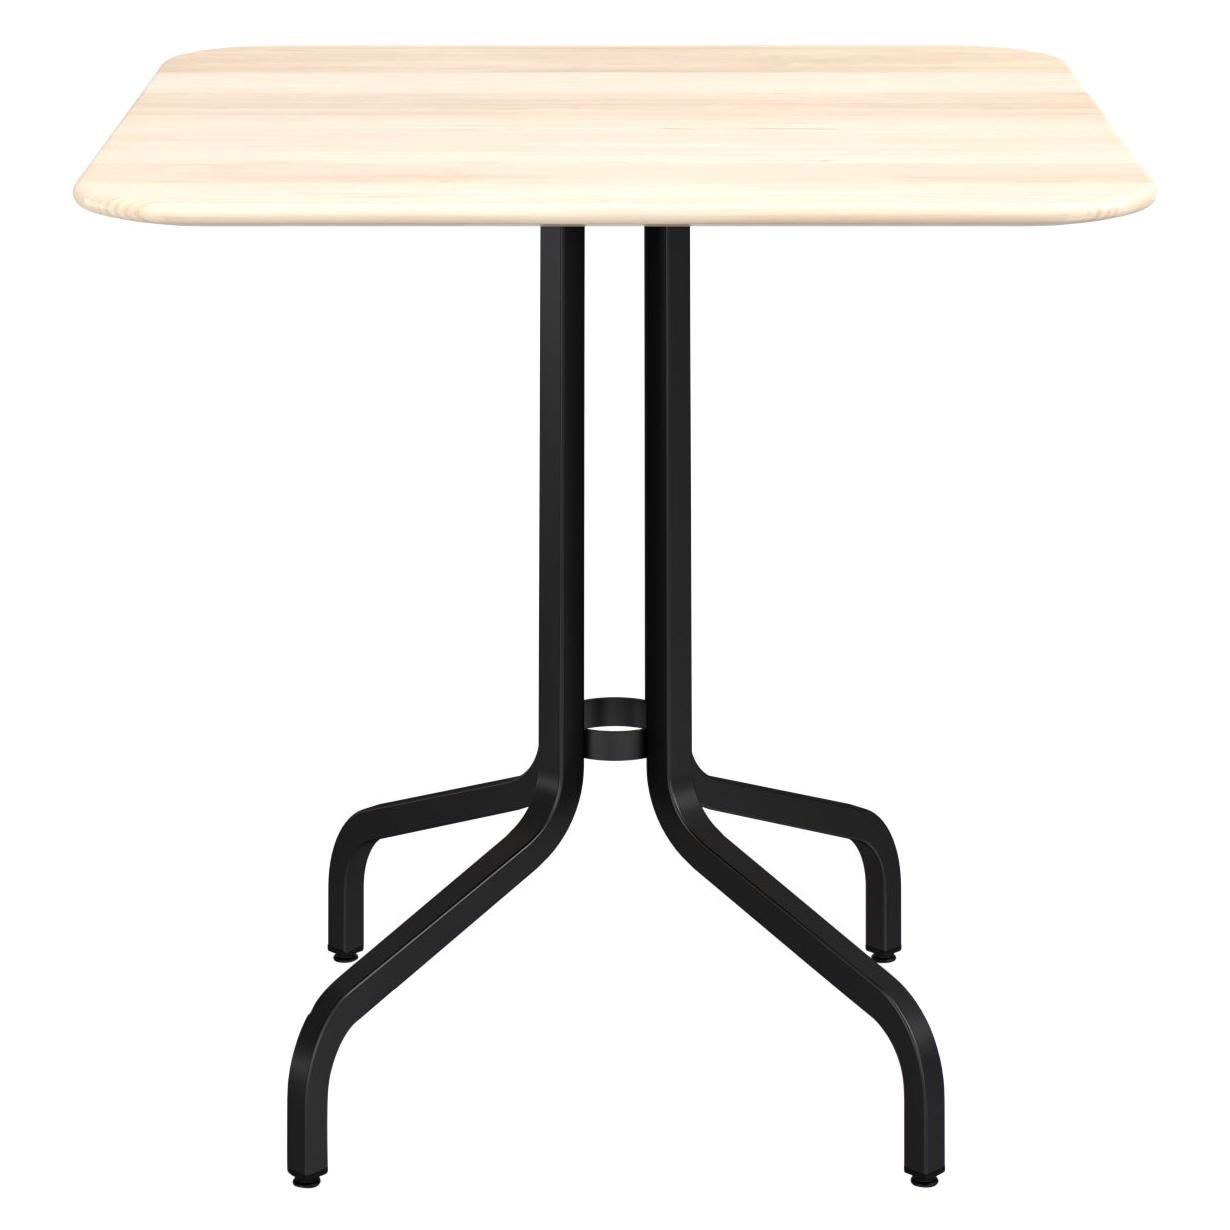 Emeco 1 Inch Medium Cafe Table with Black Legs & Wood Top by Jasper Morrison For Sale